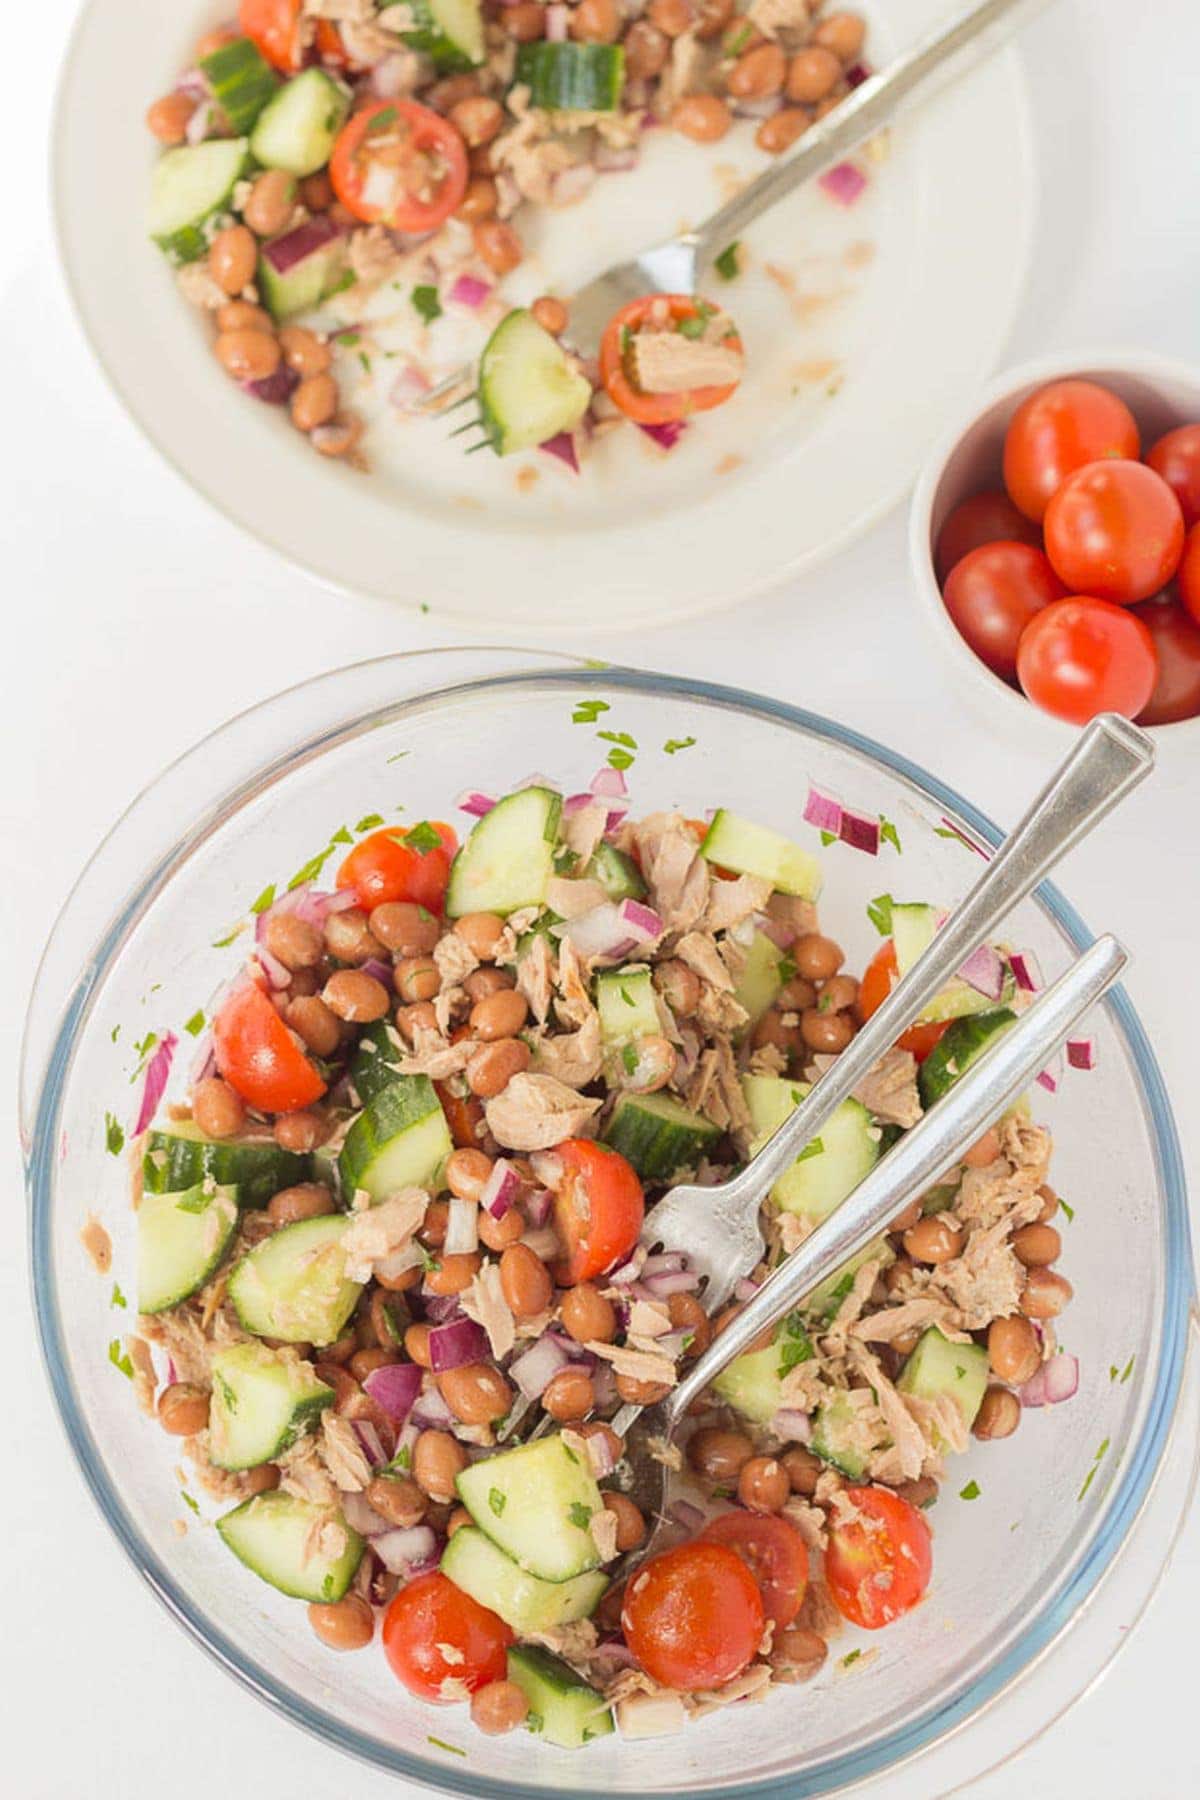 Birds eye view of a salad bowl of borlotti bean and tuna salad with serving utensils in at the bottom and a plate with a serving of the salad and a fork on at the top.